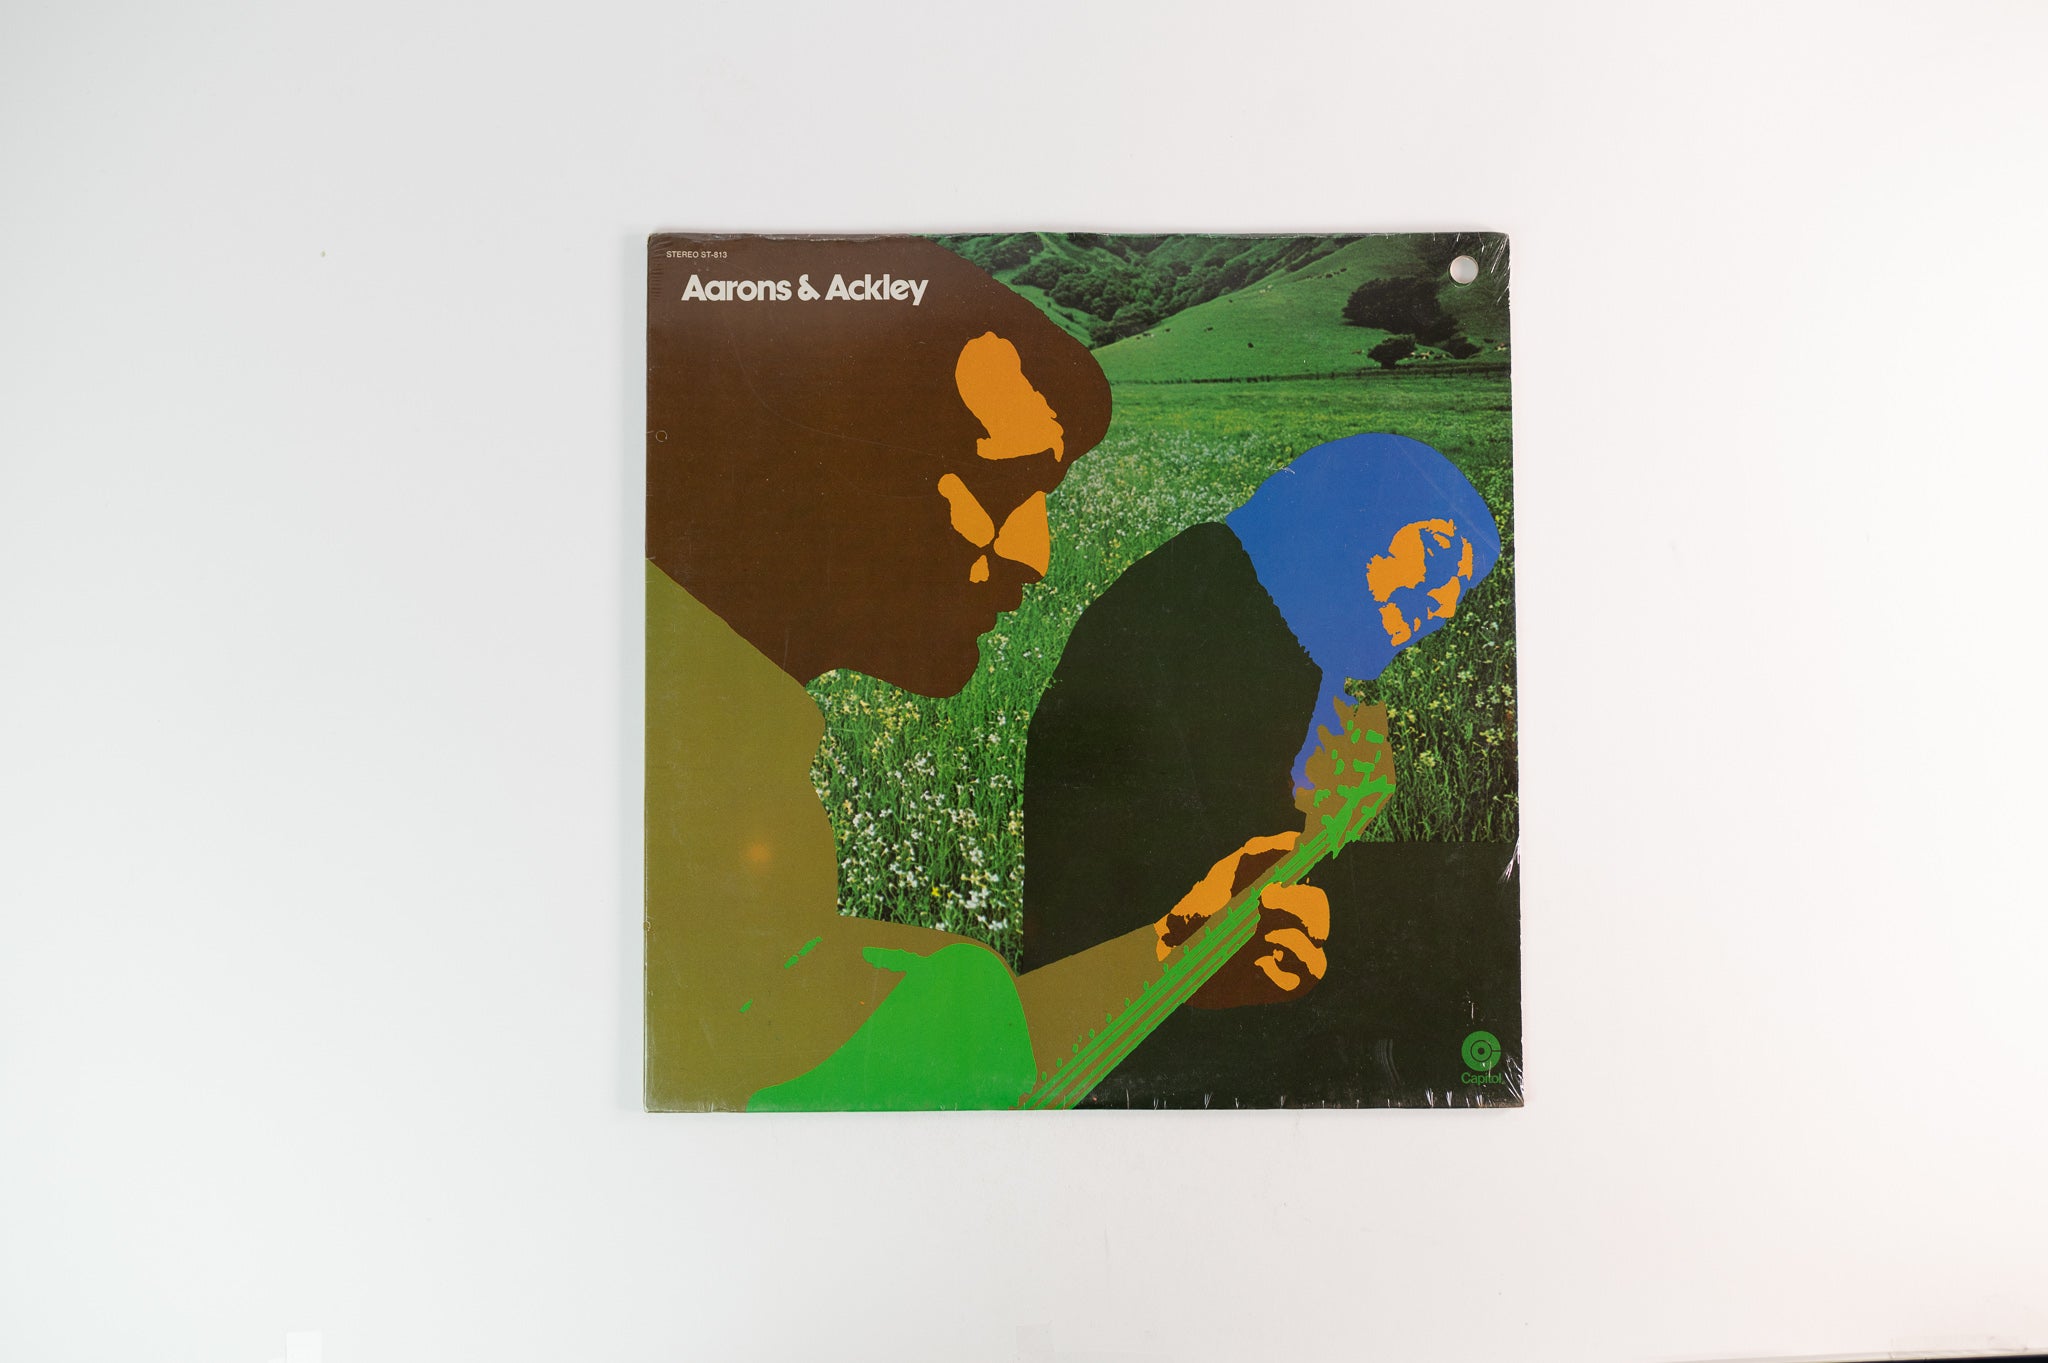 Aarons & Ackley - Aarons & Ackley on Capitol - Sealed